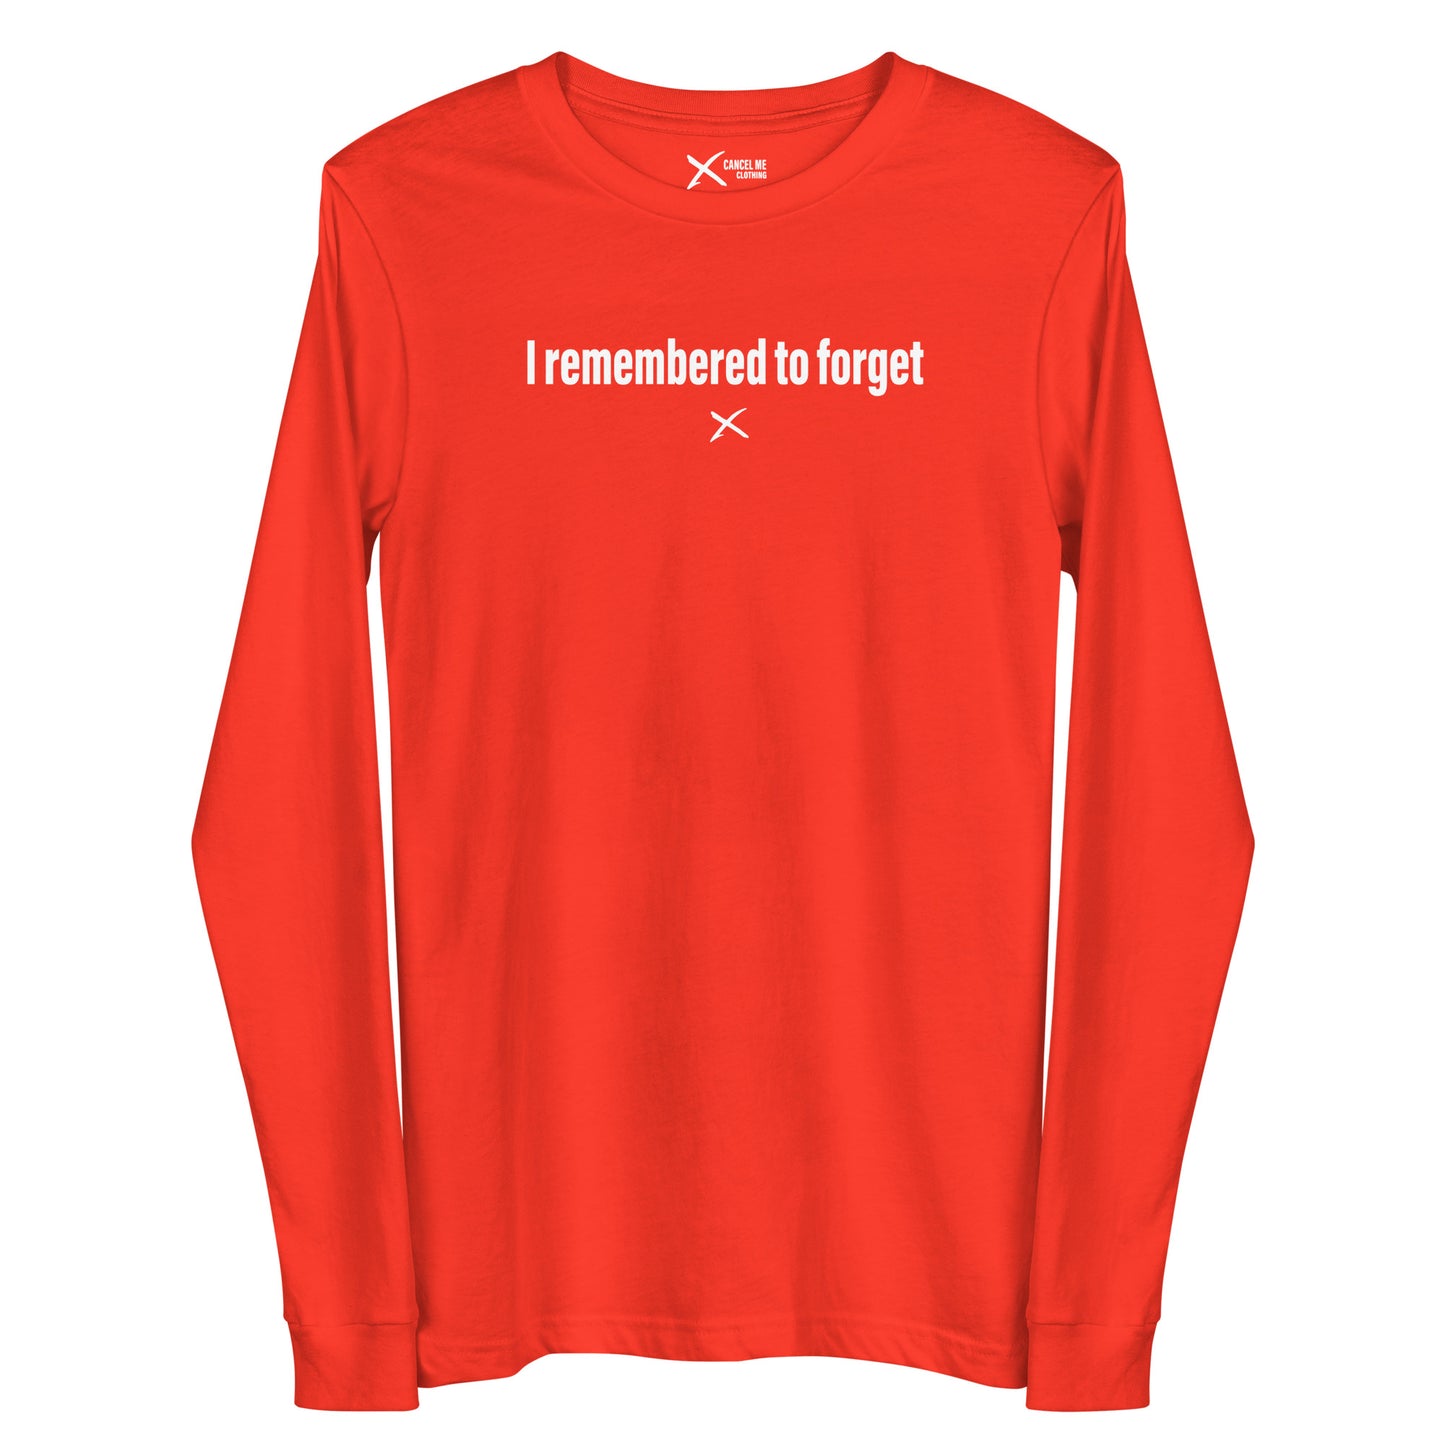 I remembered to forget - Longsleeve